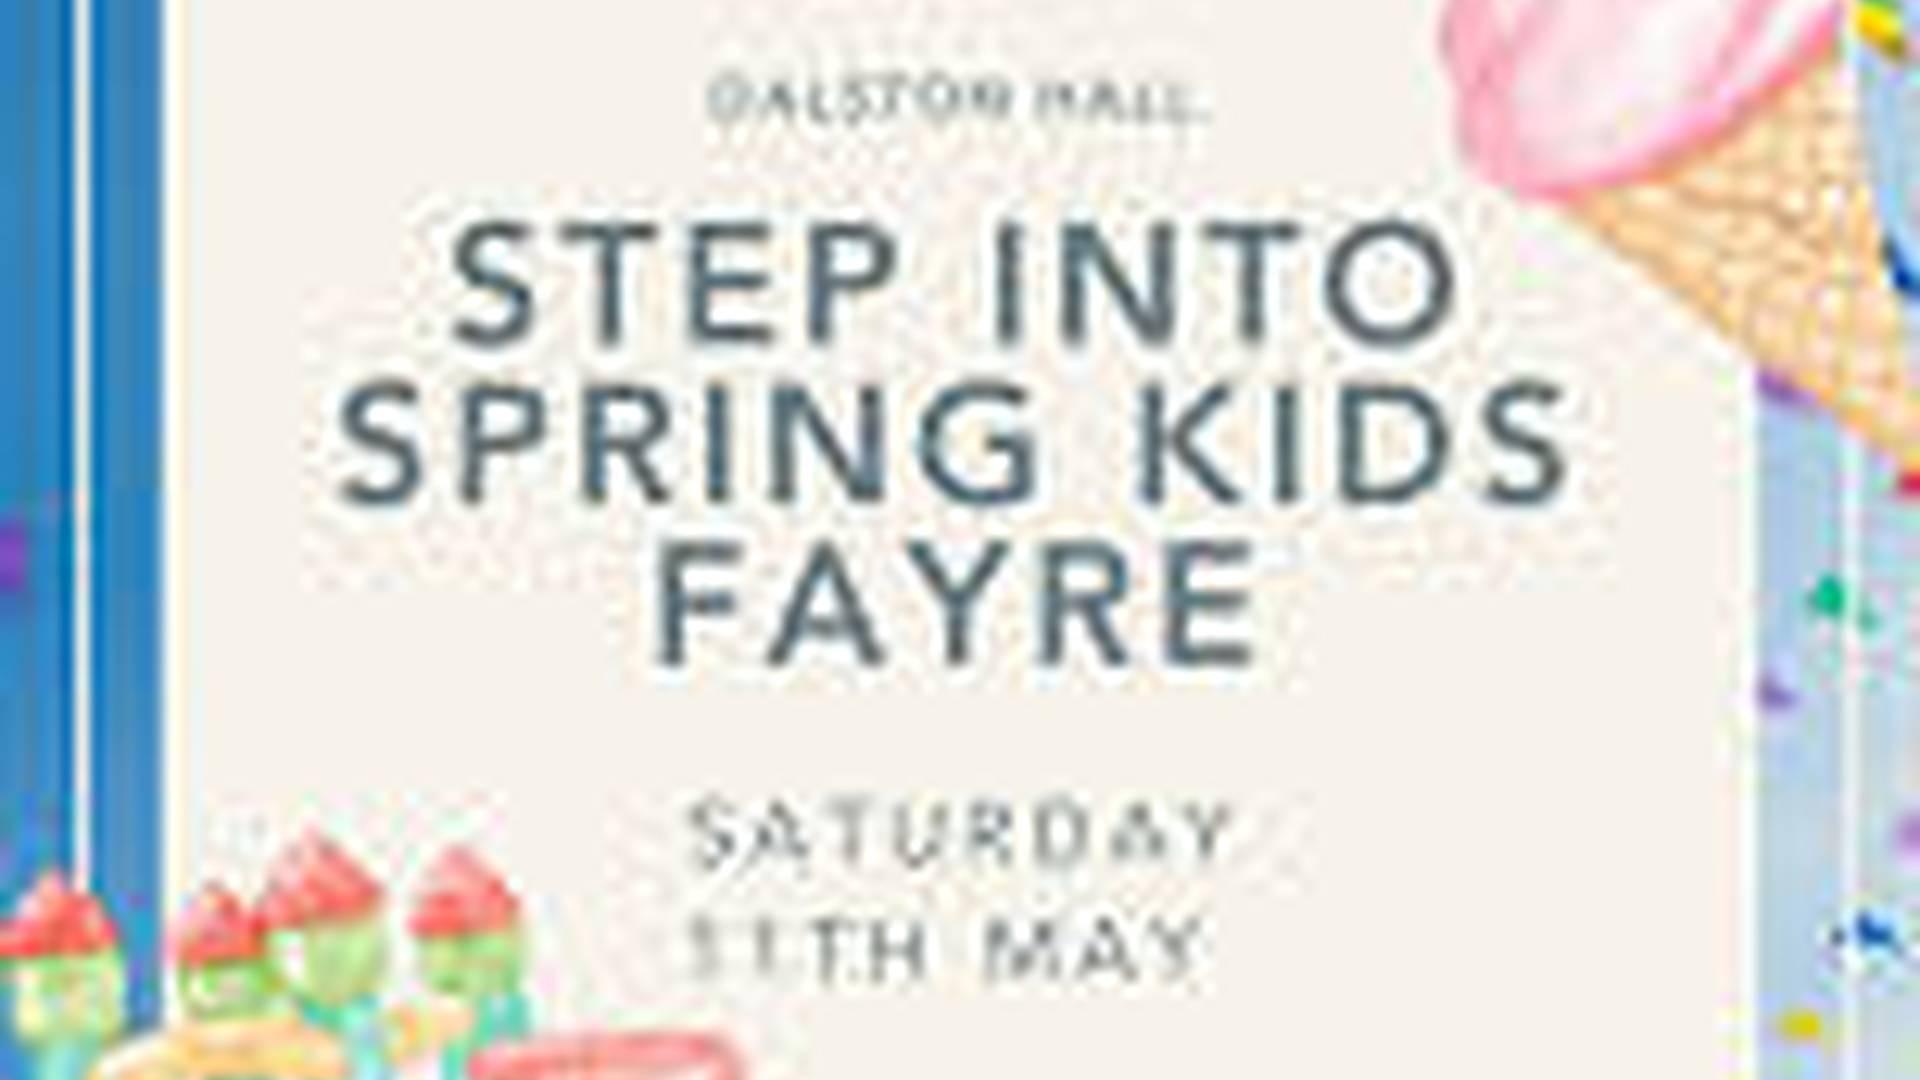 Step into Spring-Kids Fayre photo